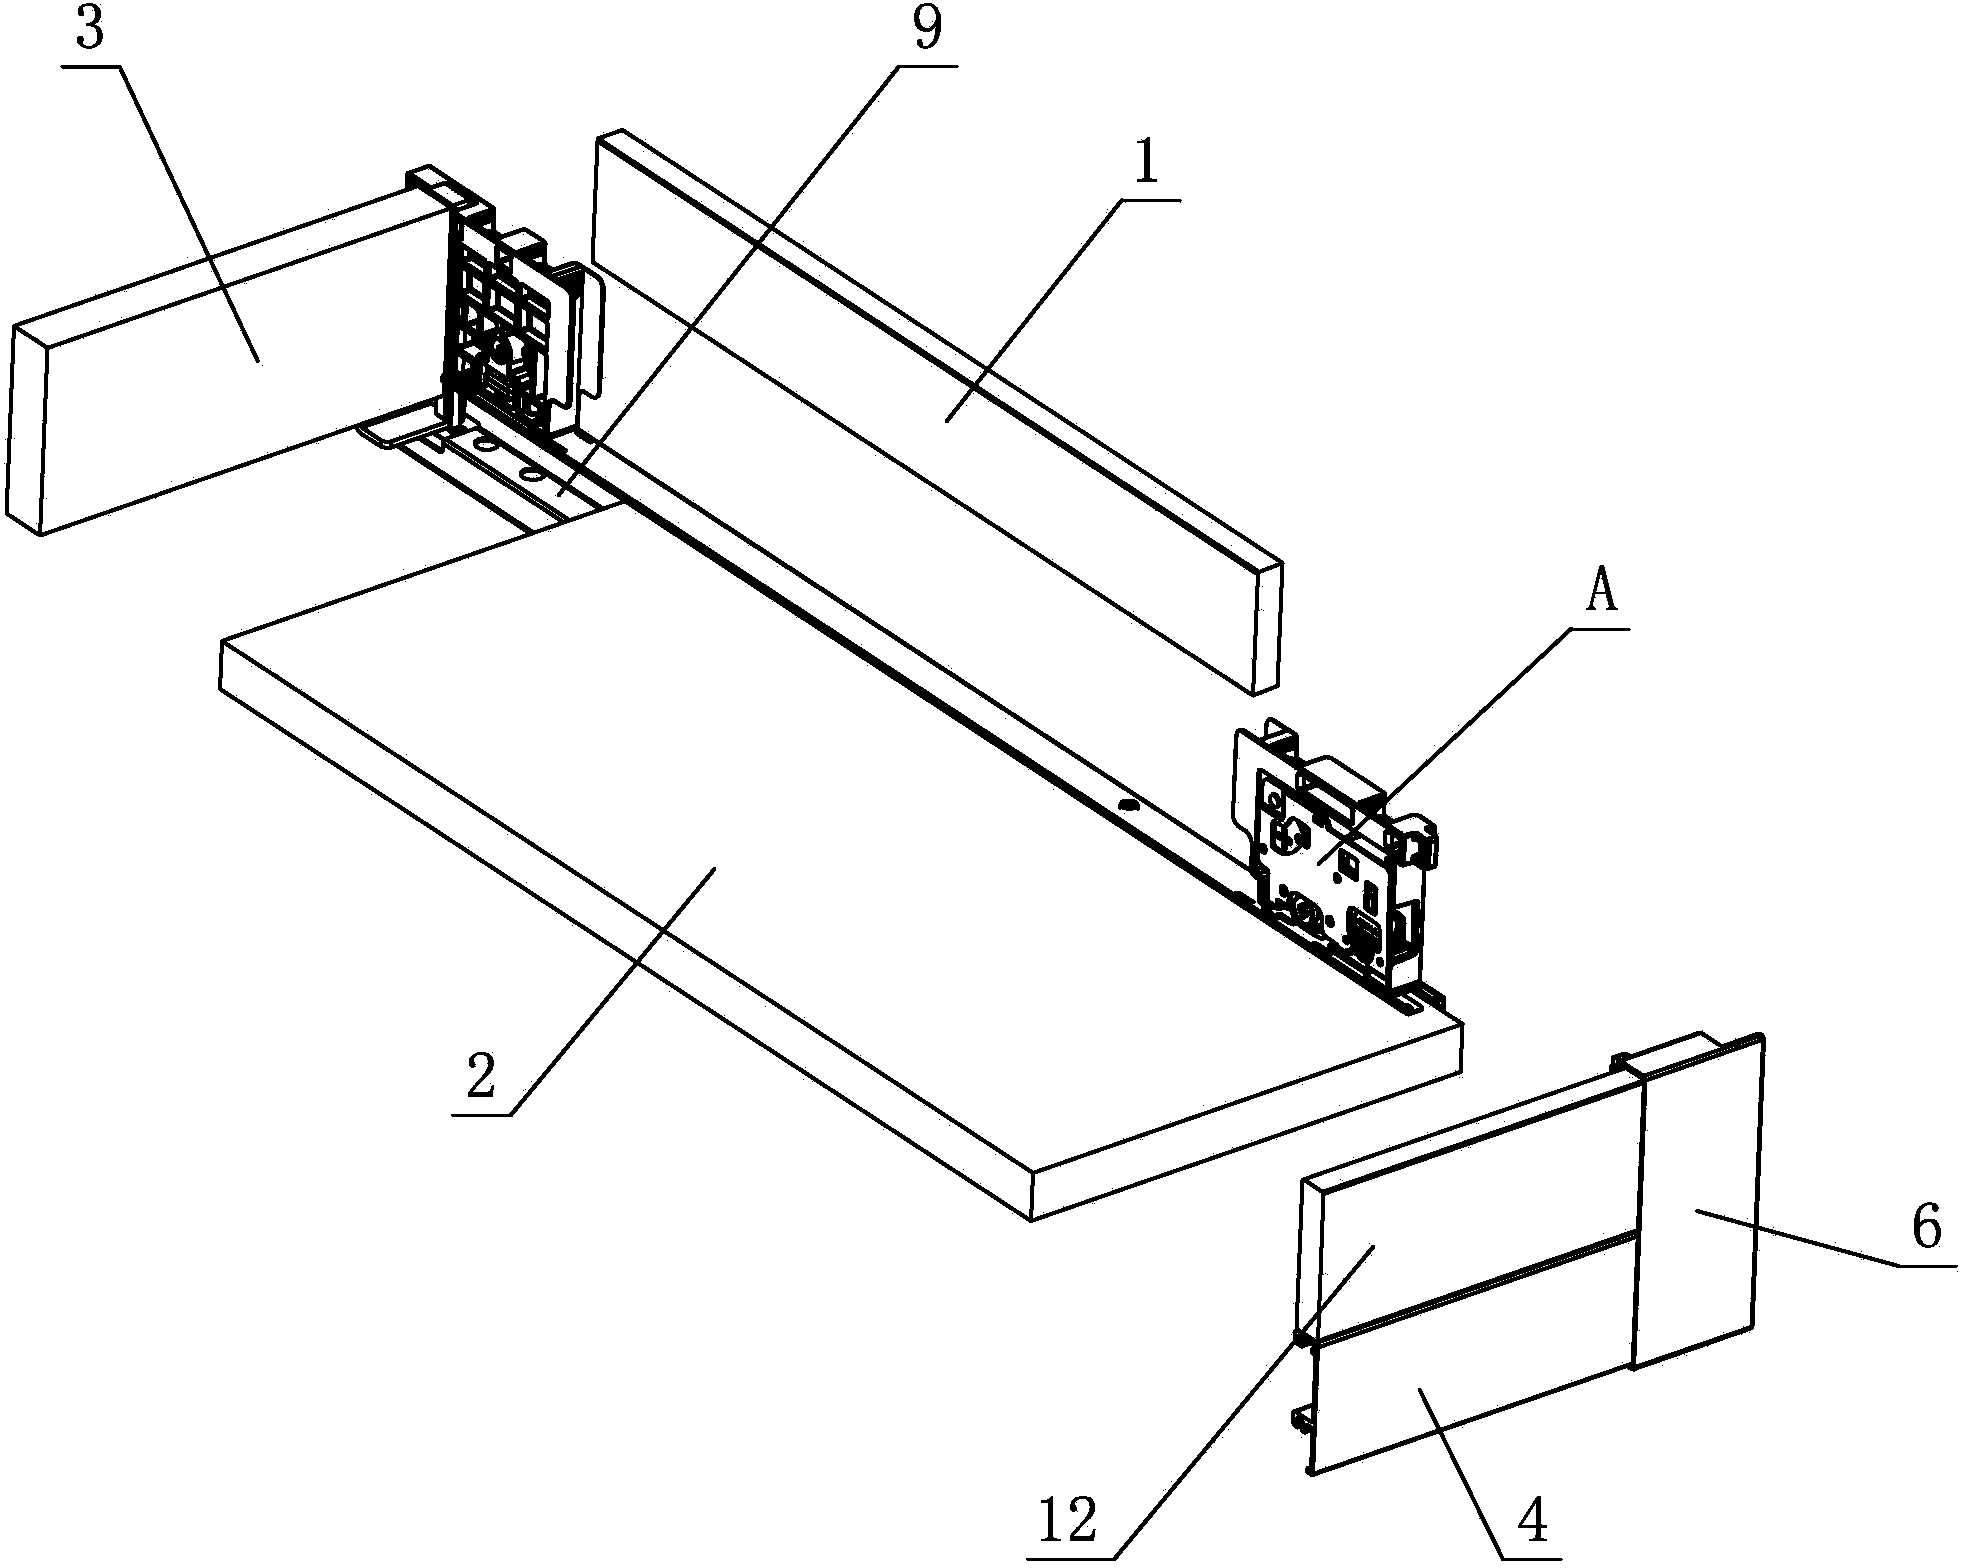 Integrated optimization structure for drawer front panel